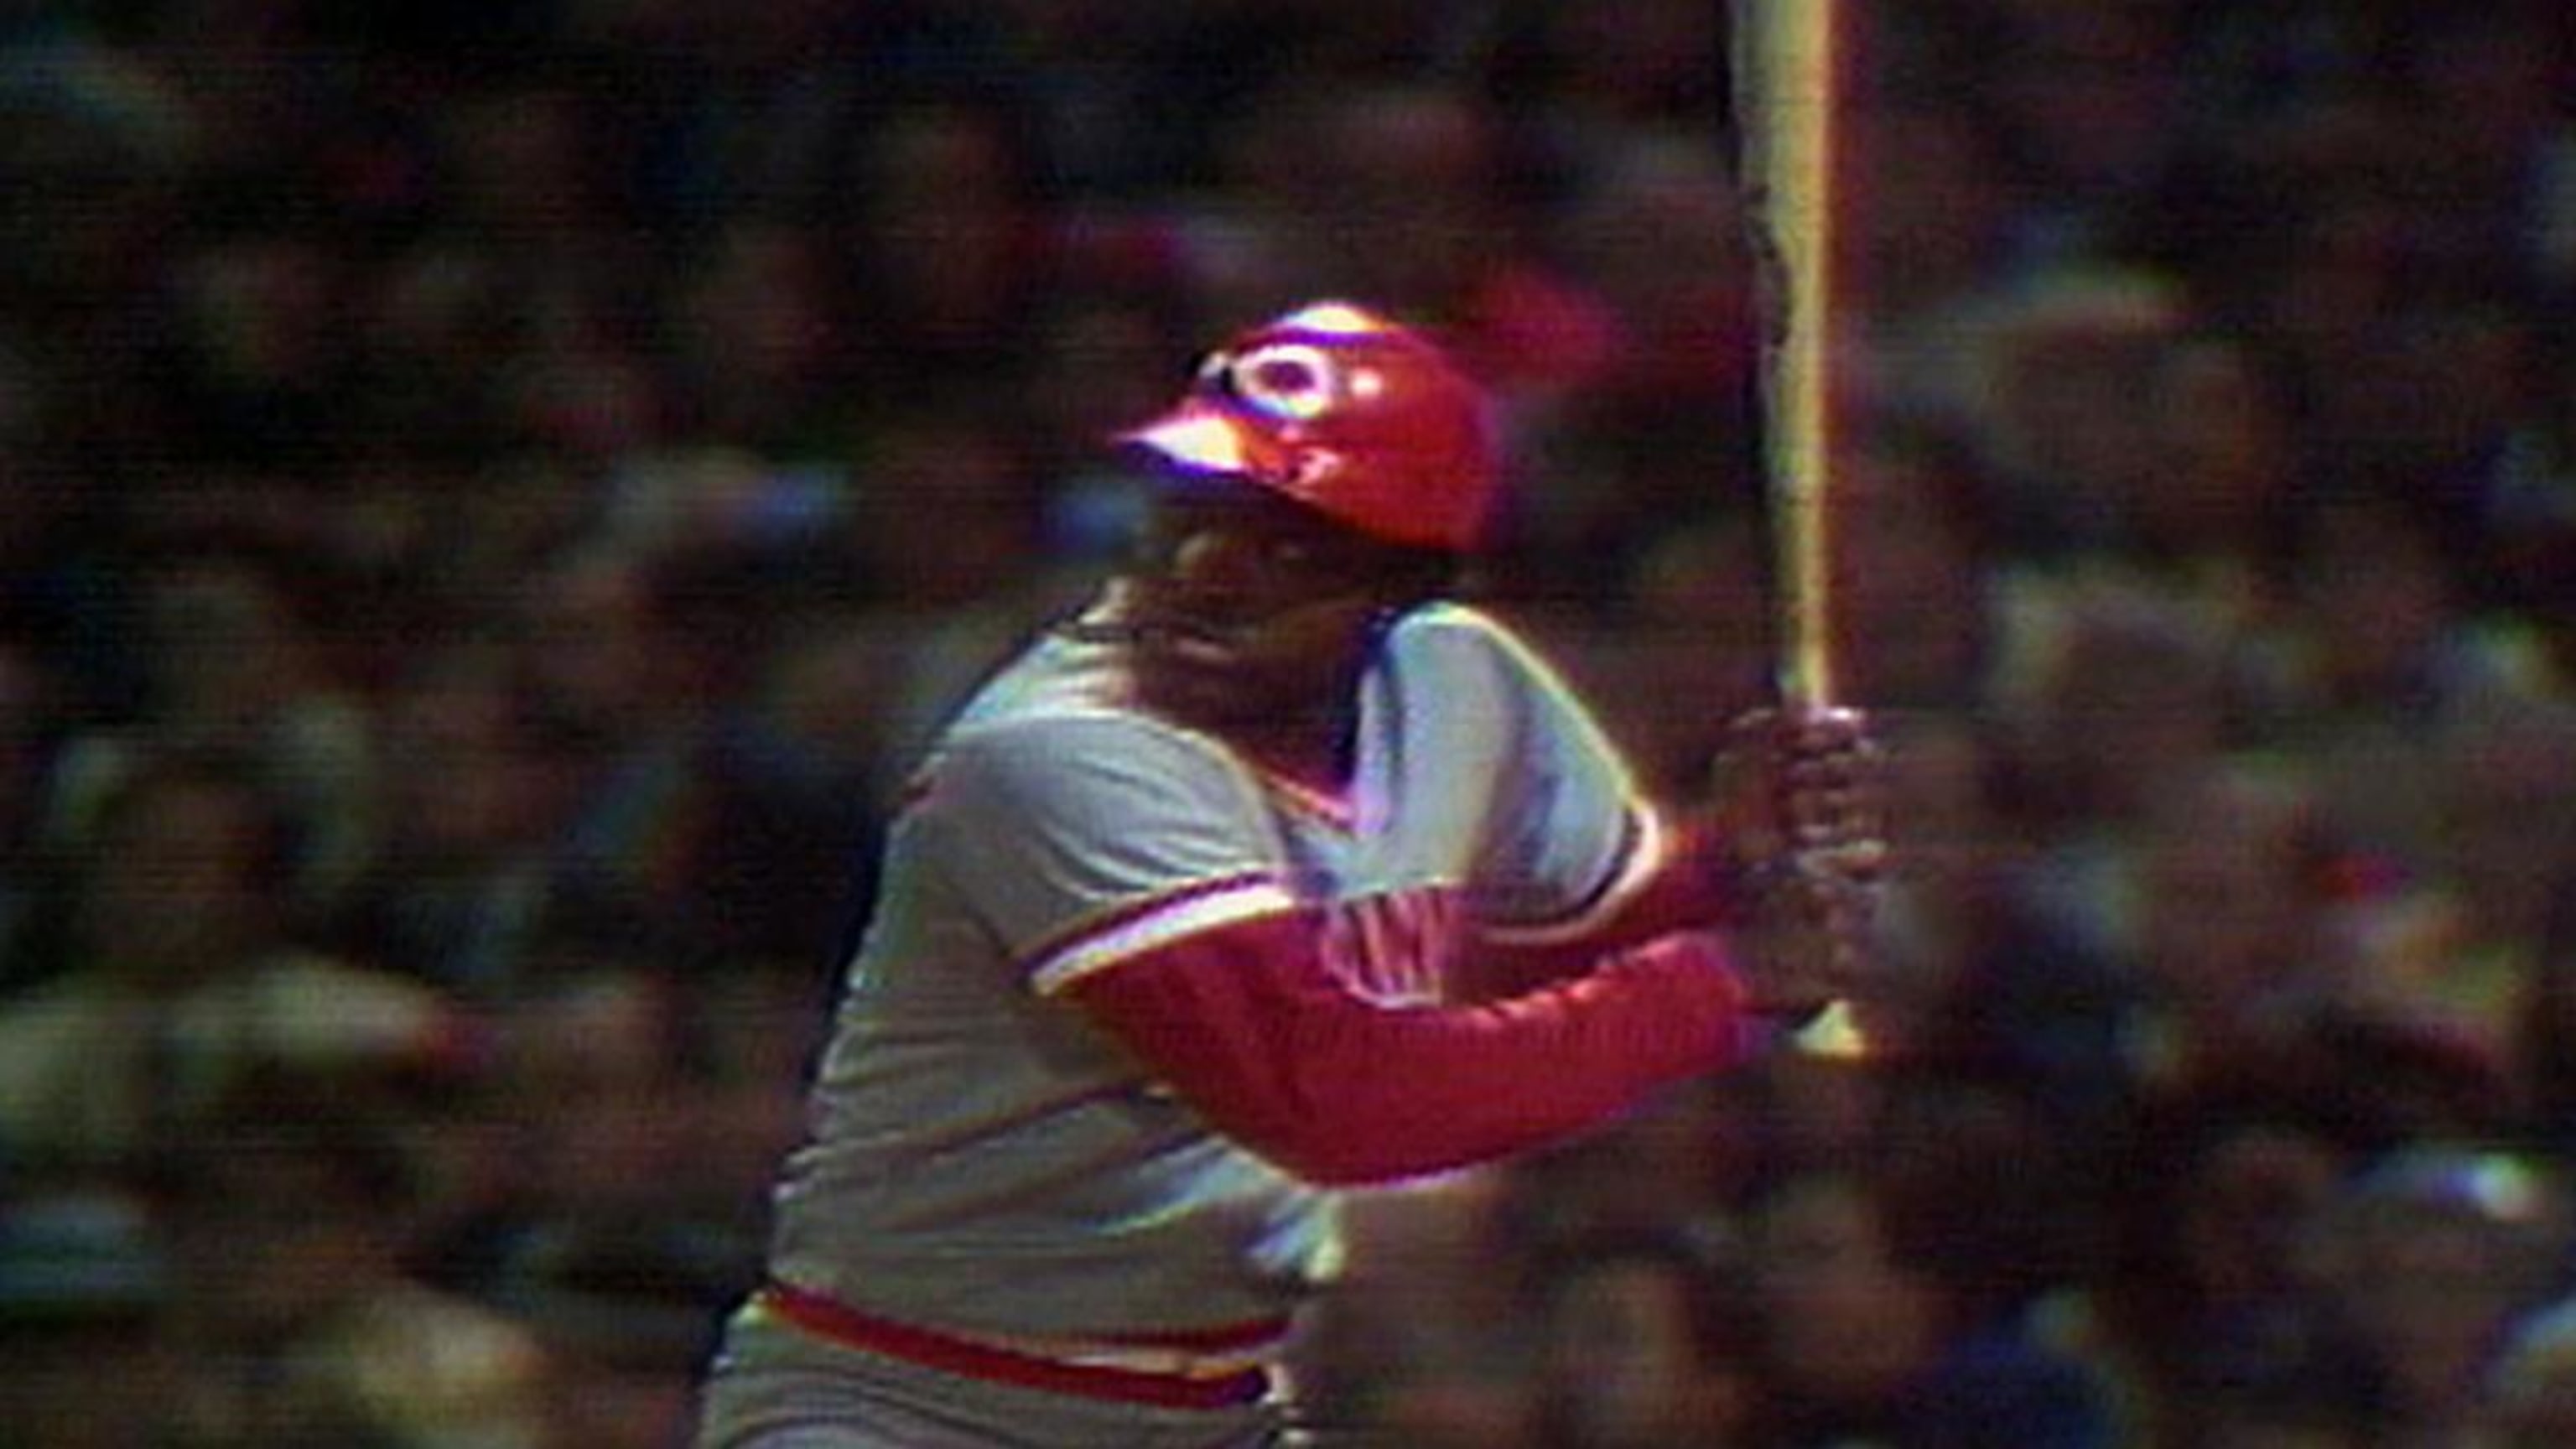 Joe Morgan's Death Adds to Baseball's Stretch of Grief